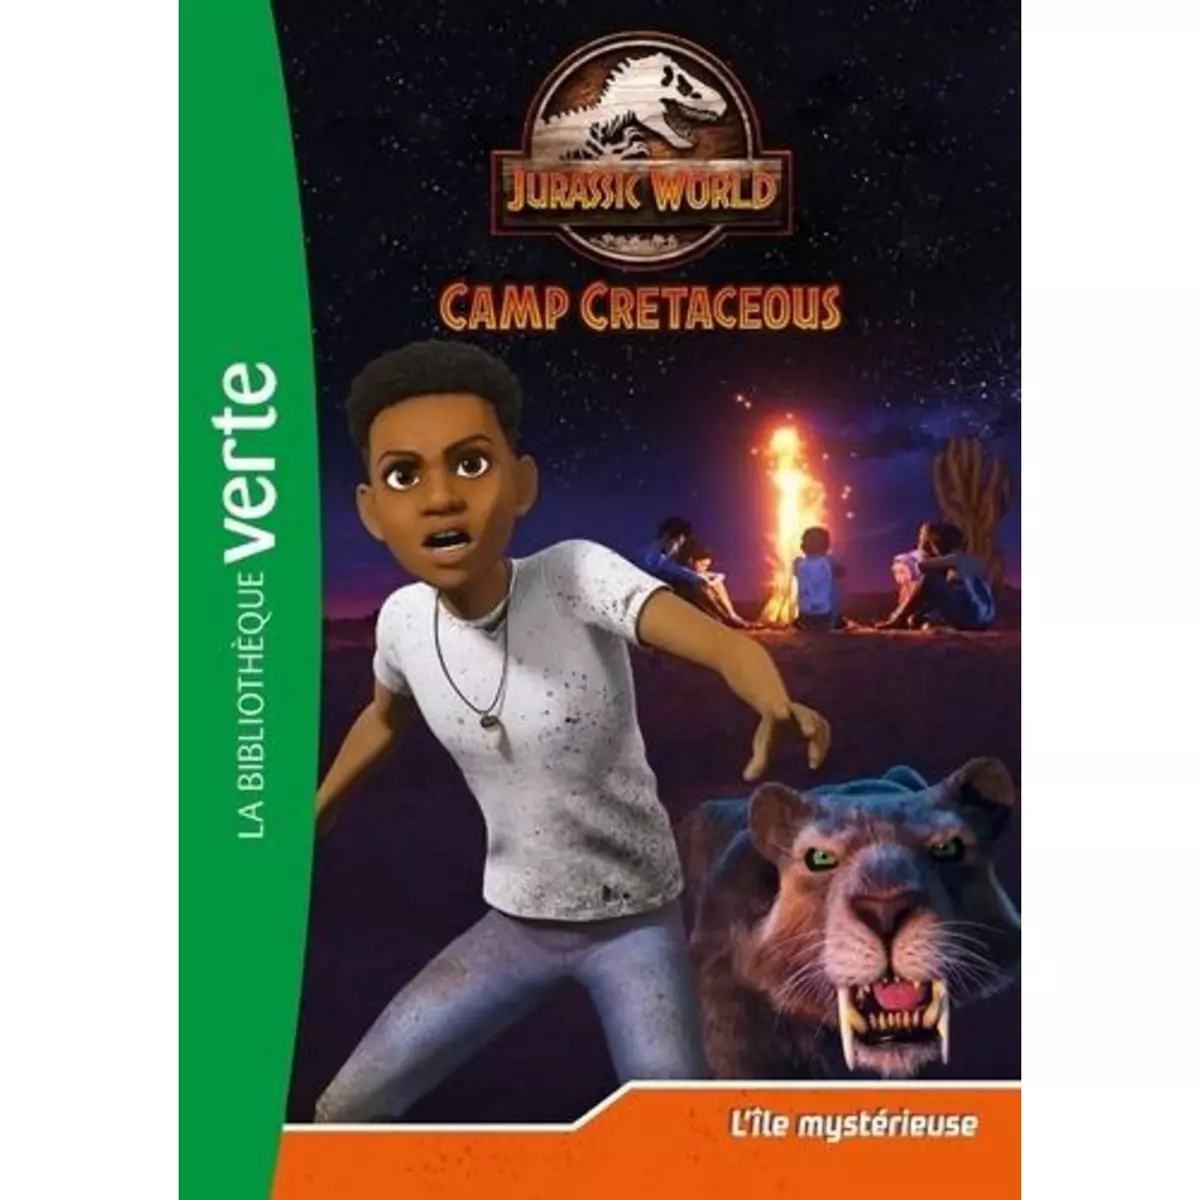  JURASSIC WORLD CAMP CRETACEOUS TOME 15 : L'ILE MYSTERIEUSE, Gay Olivier